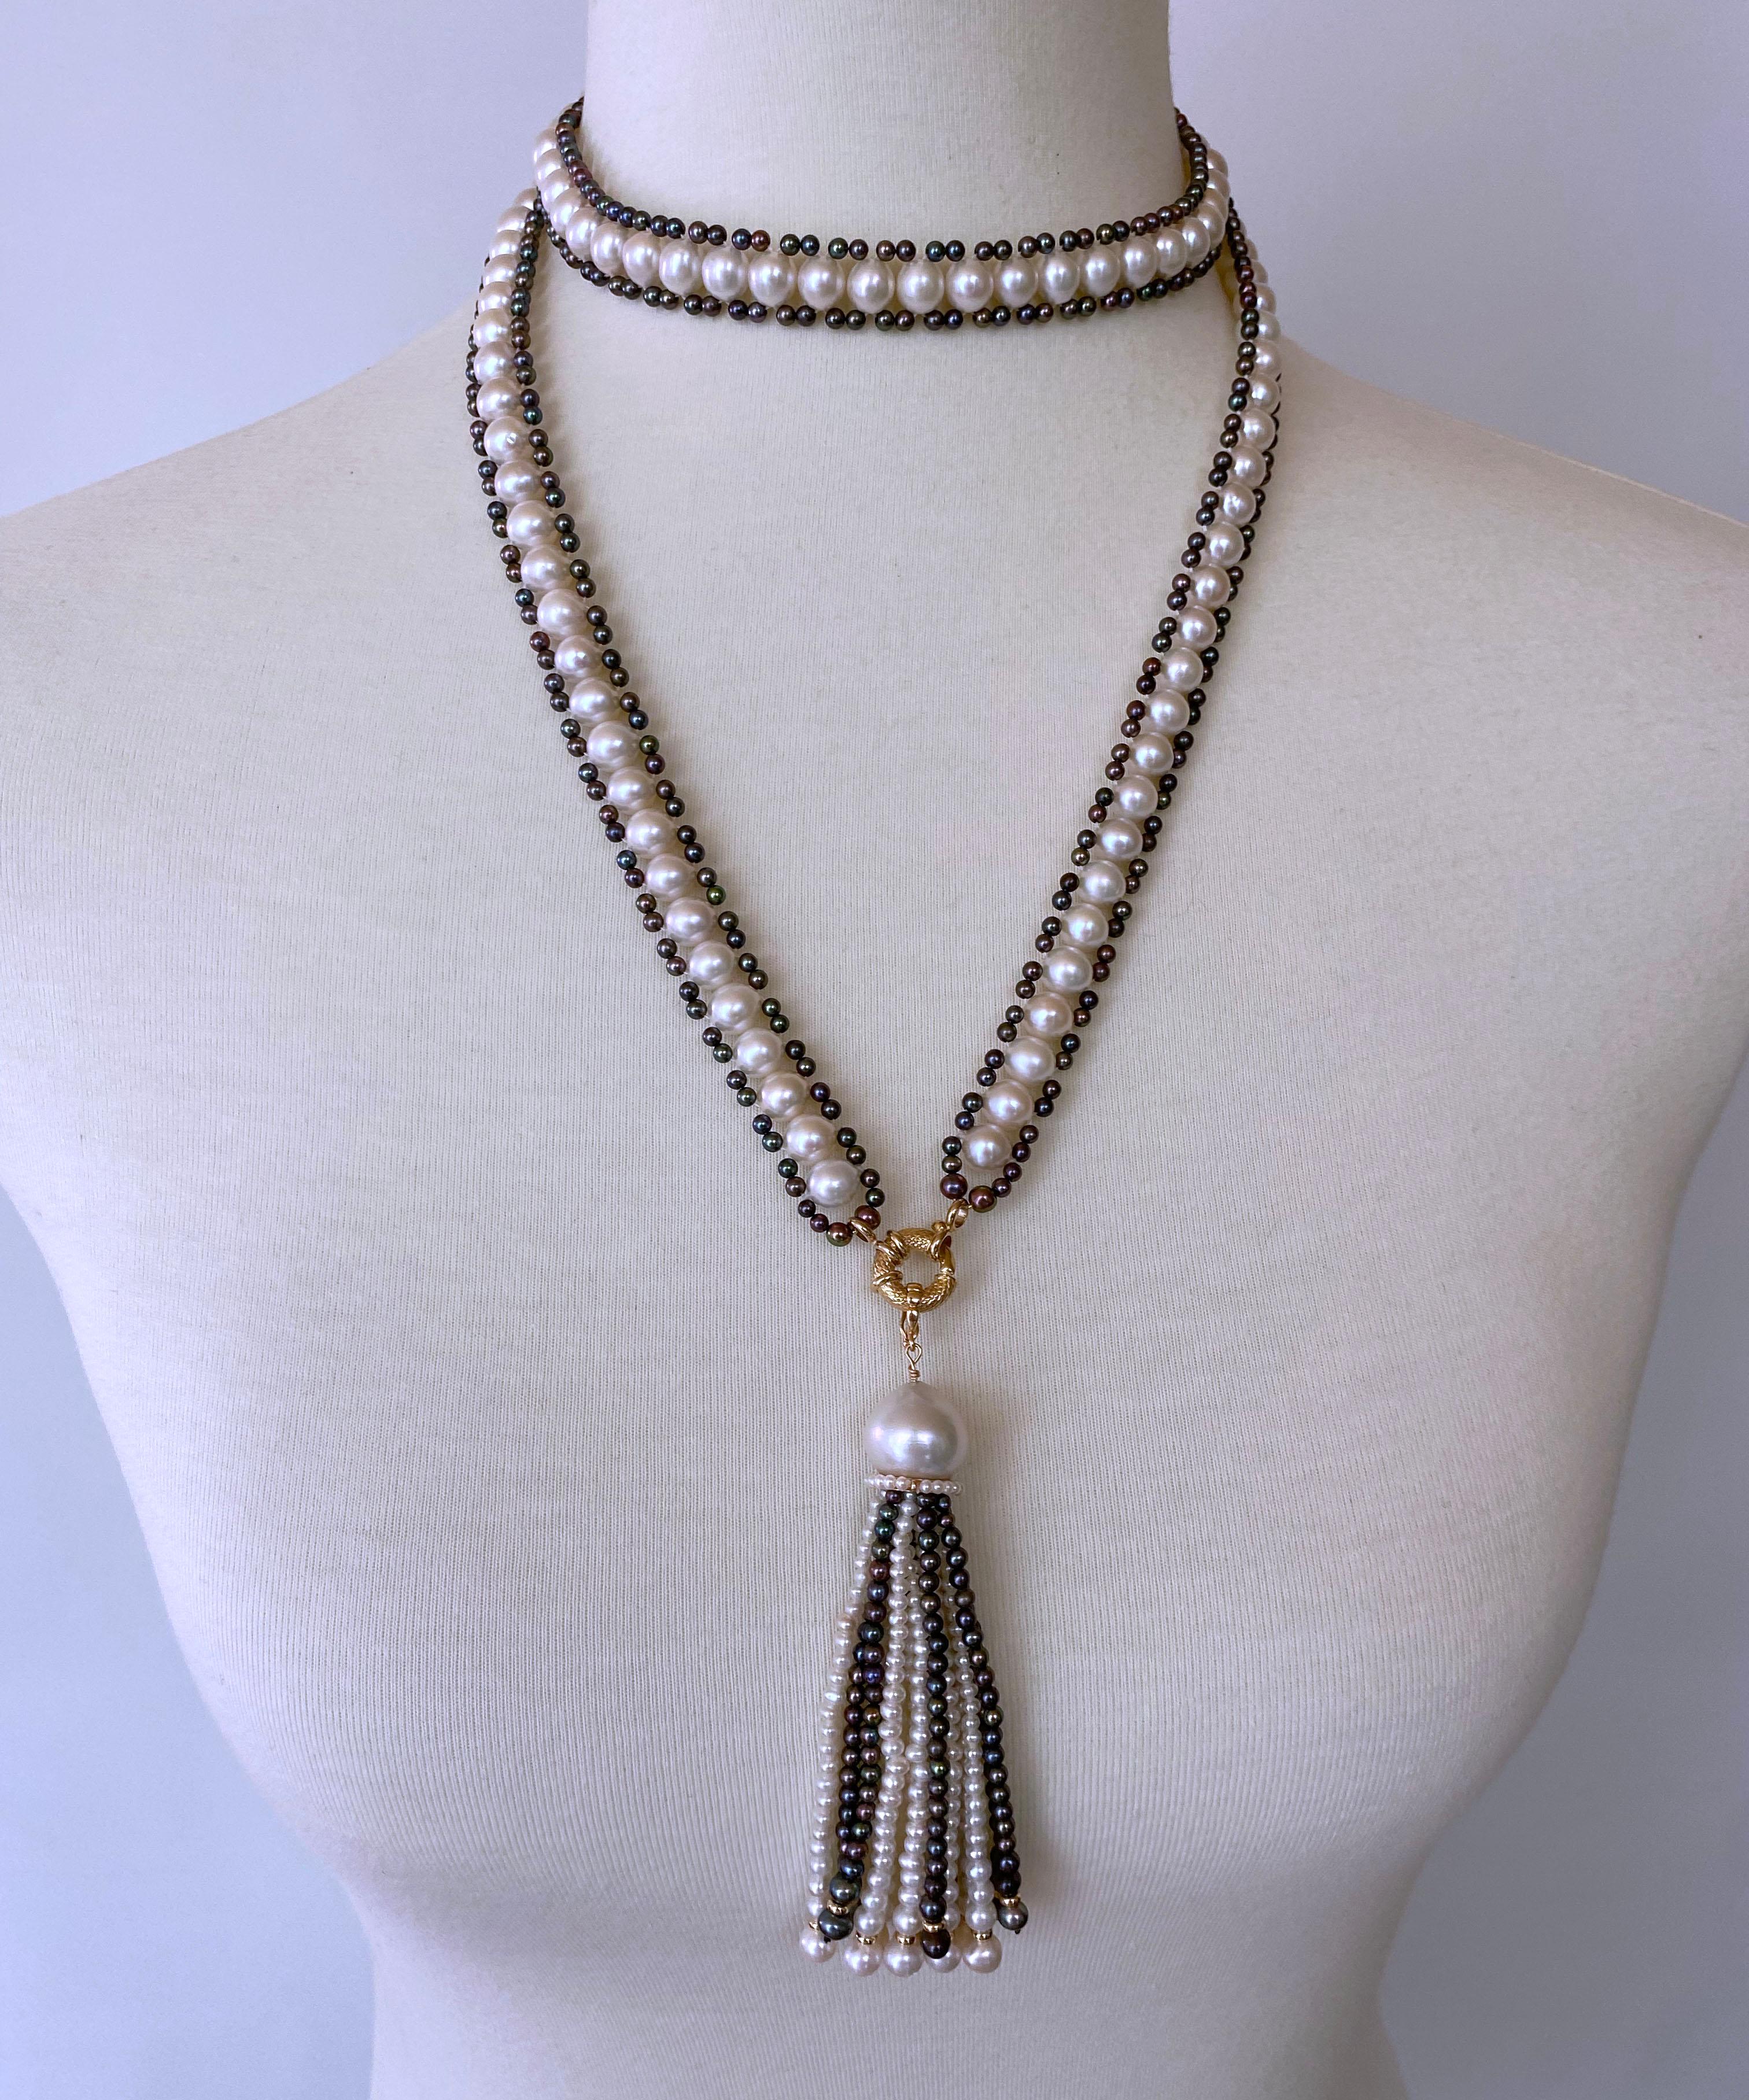 Marina J. Black & White Pearl Sautoir with Removable Tassel & 14k Yellow Gold For Sale 1